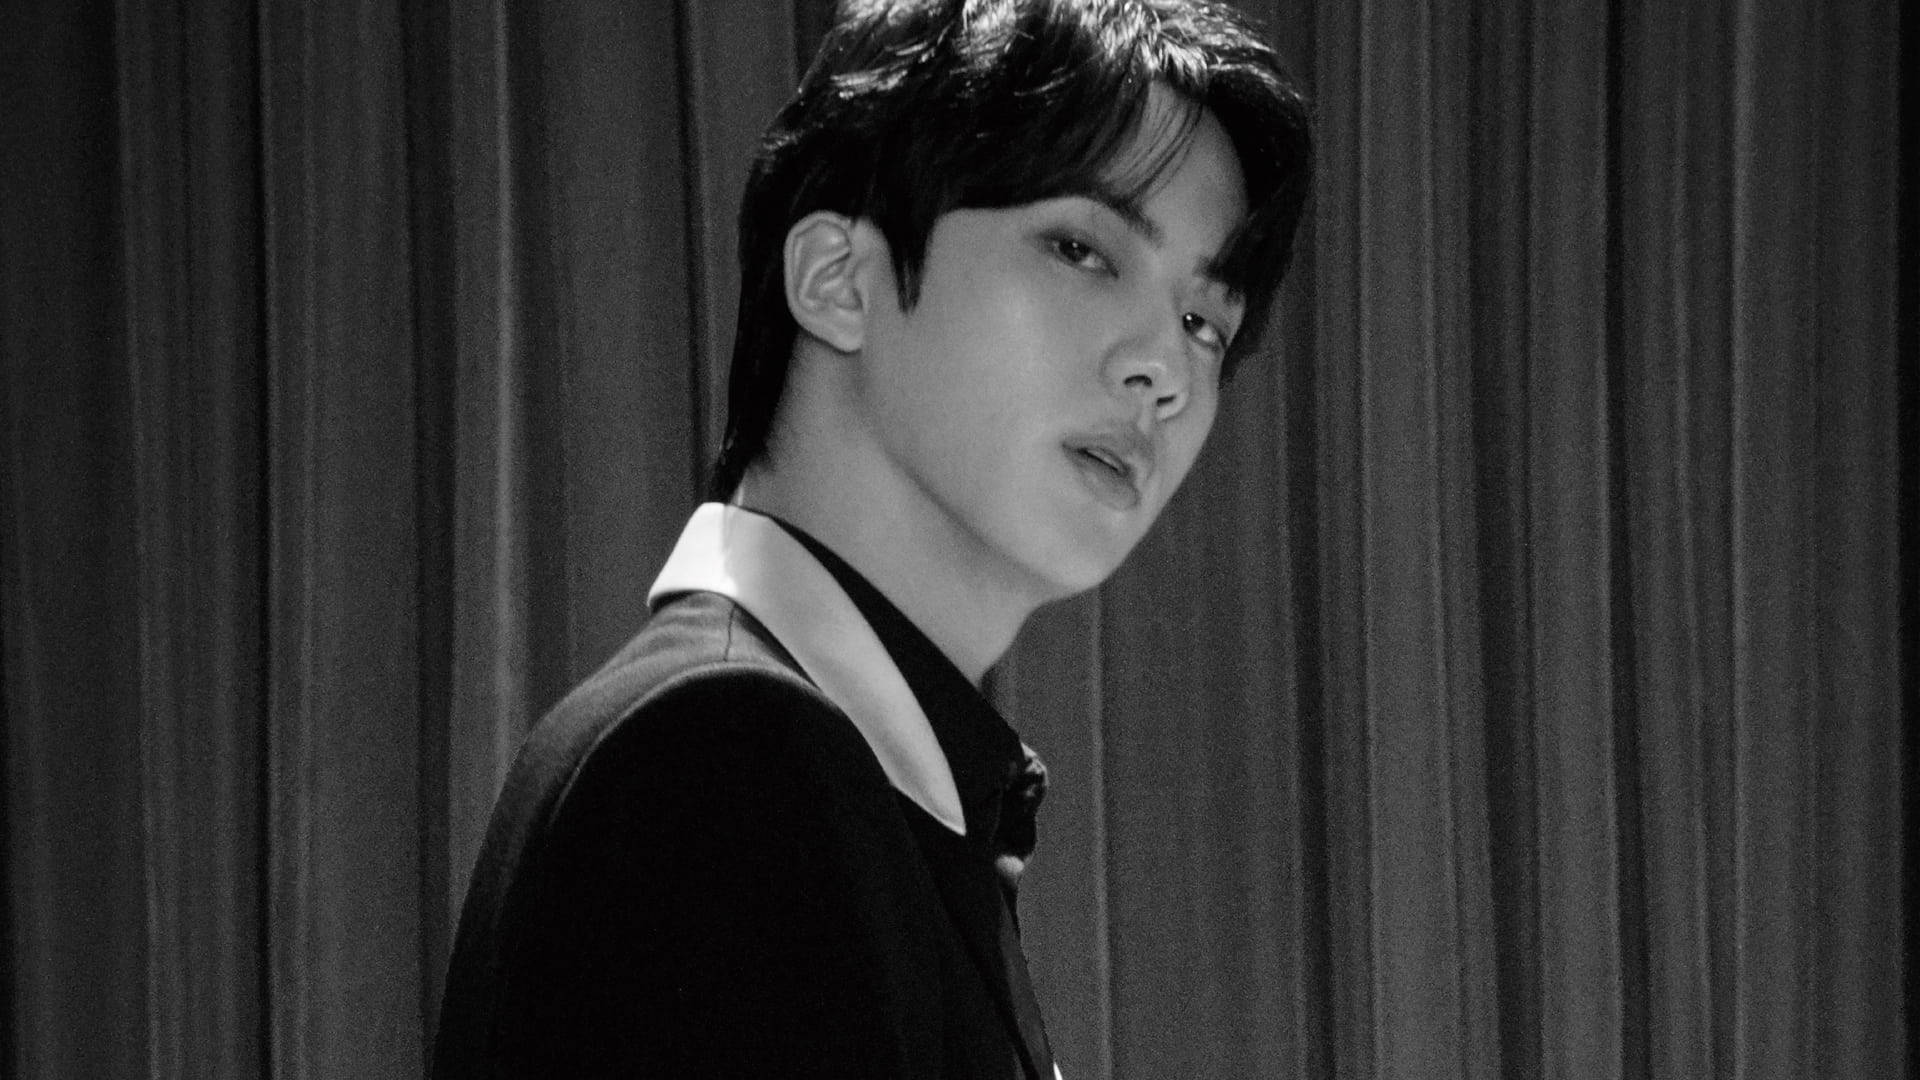 BTS Jin Captures Hearts With New Black & White Photo